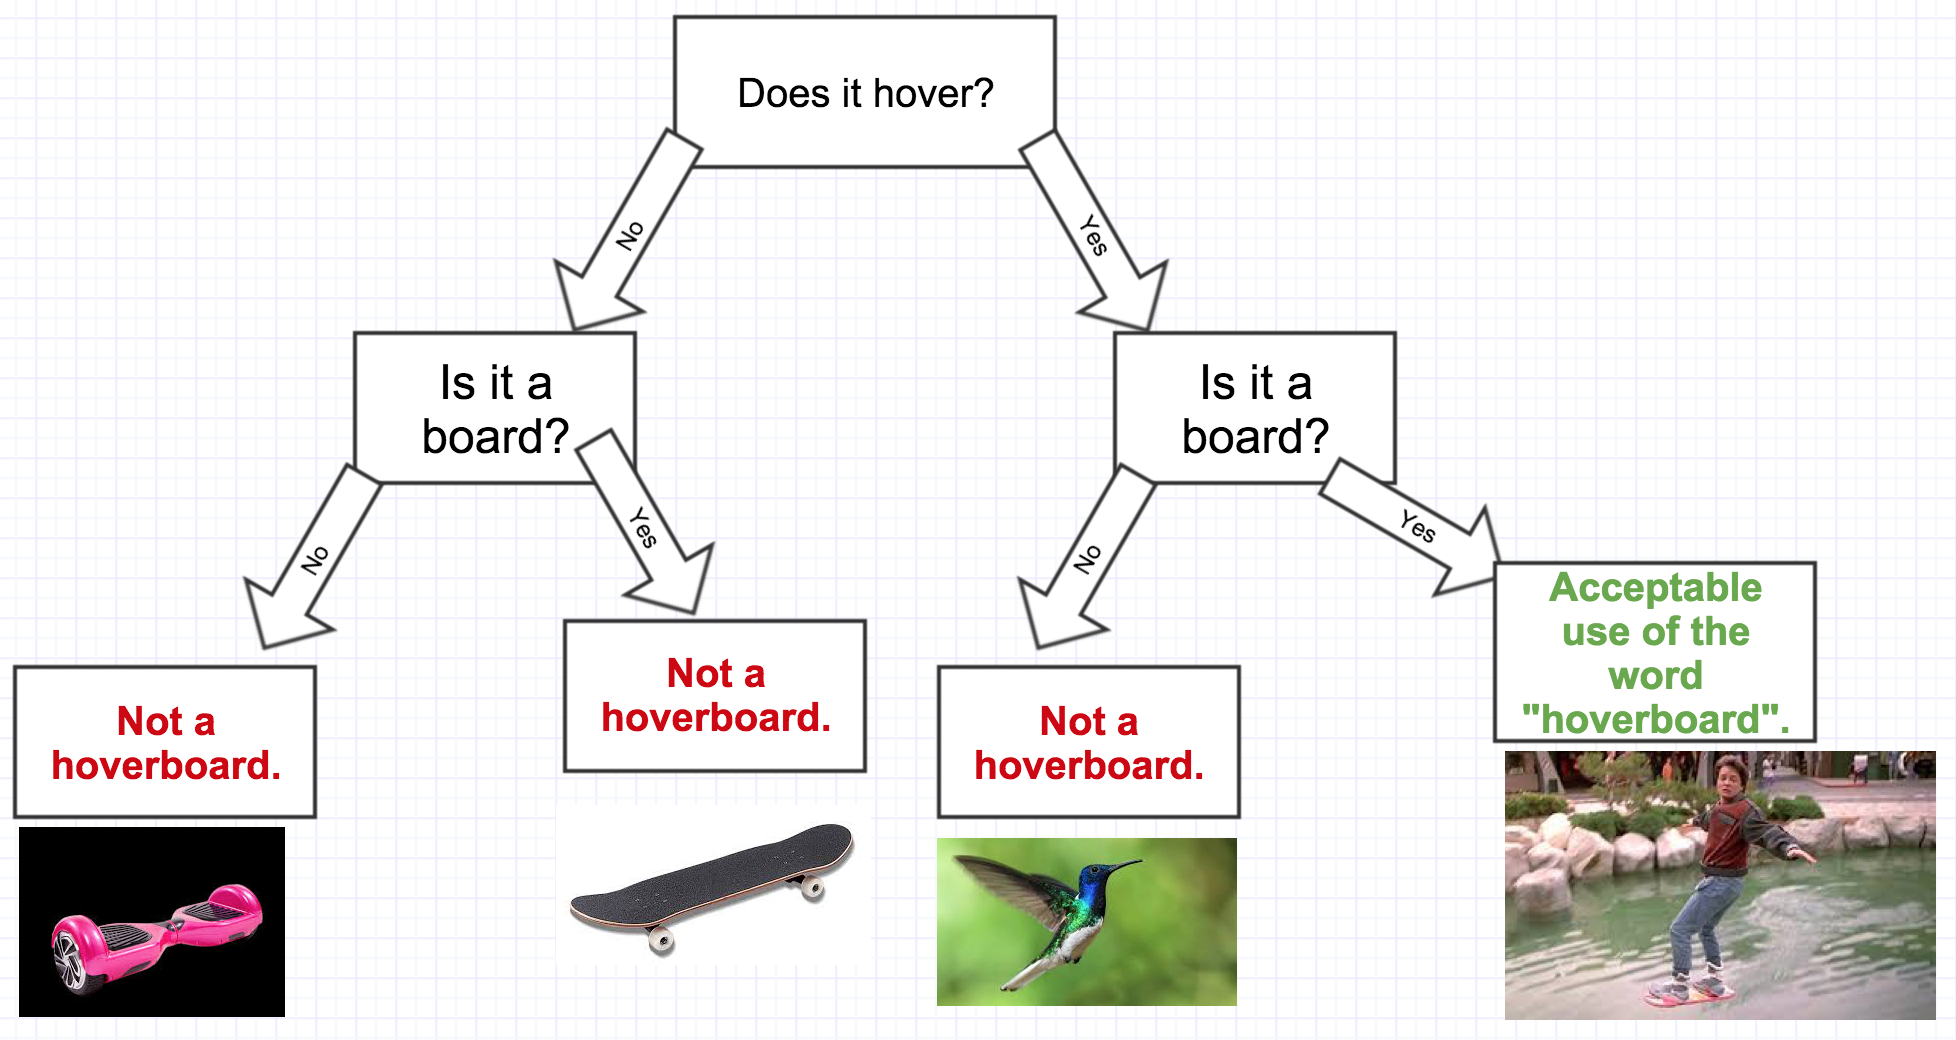 Handy flowchart for anyone with a 'hoverboard'